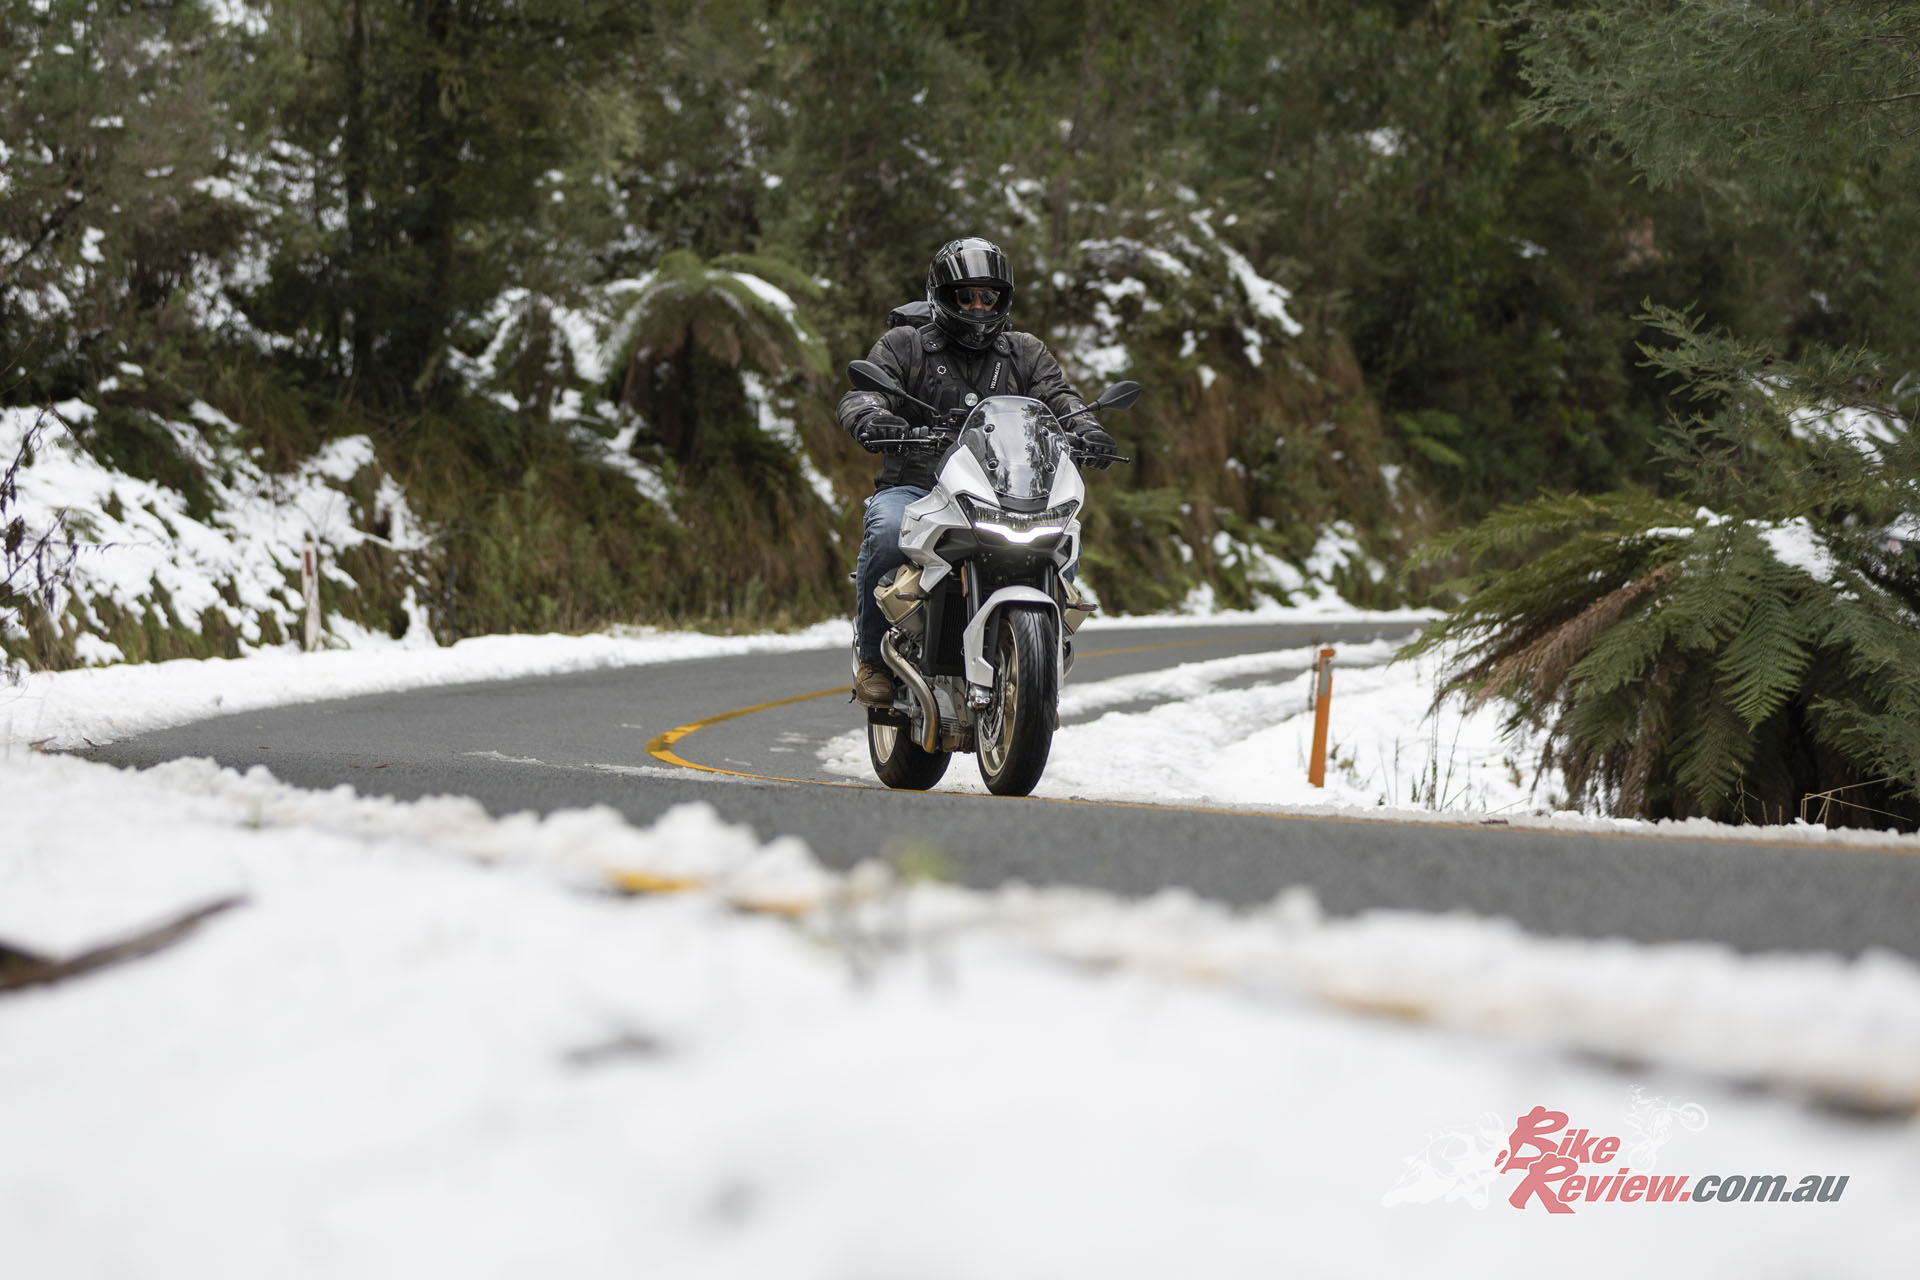 "On the road it's such a confident bike, the tighter the turns the more it feels like a sportsbike, and yet it still manages to deliver a plush ride the entire time. Even as we hit patches of snow, the Guzzi stays planted and the traction control works really well."